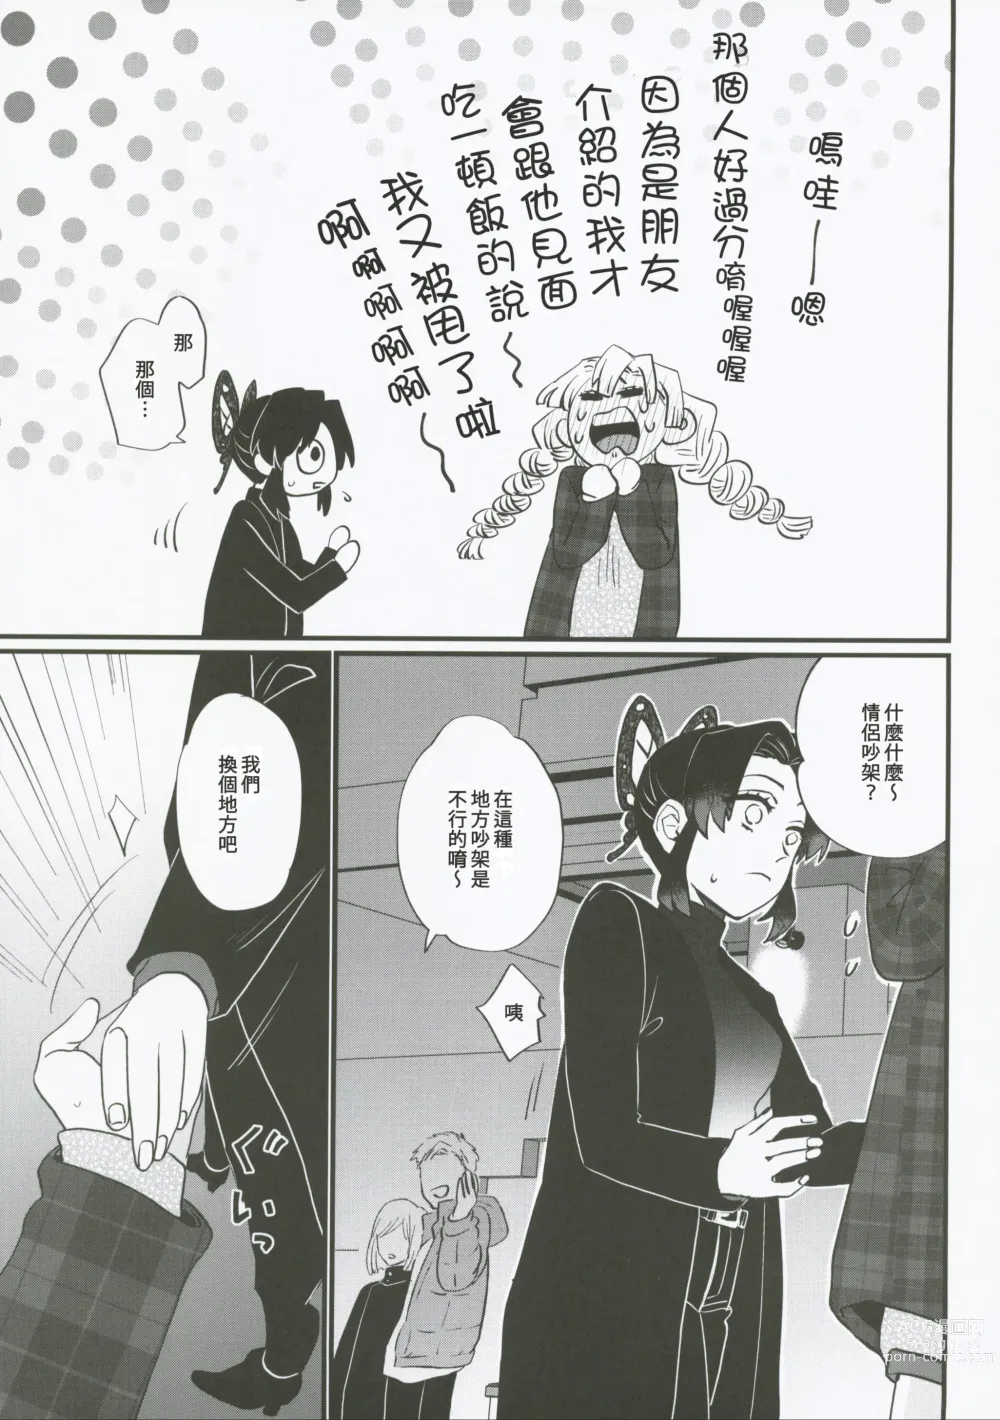 Page 9 of doujinshi 屬於妳的Omega